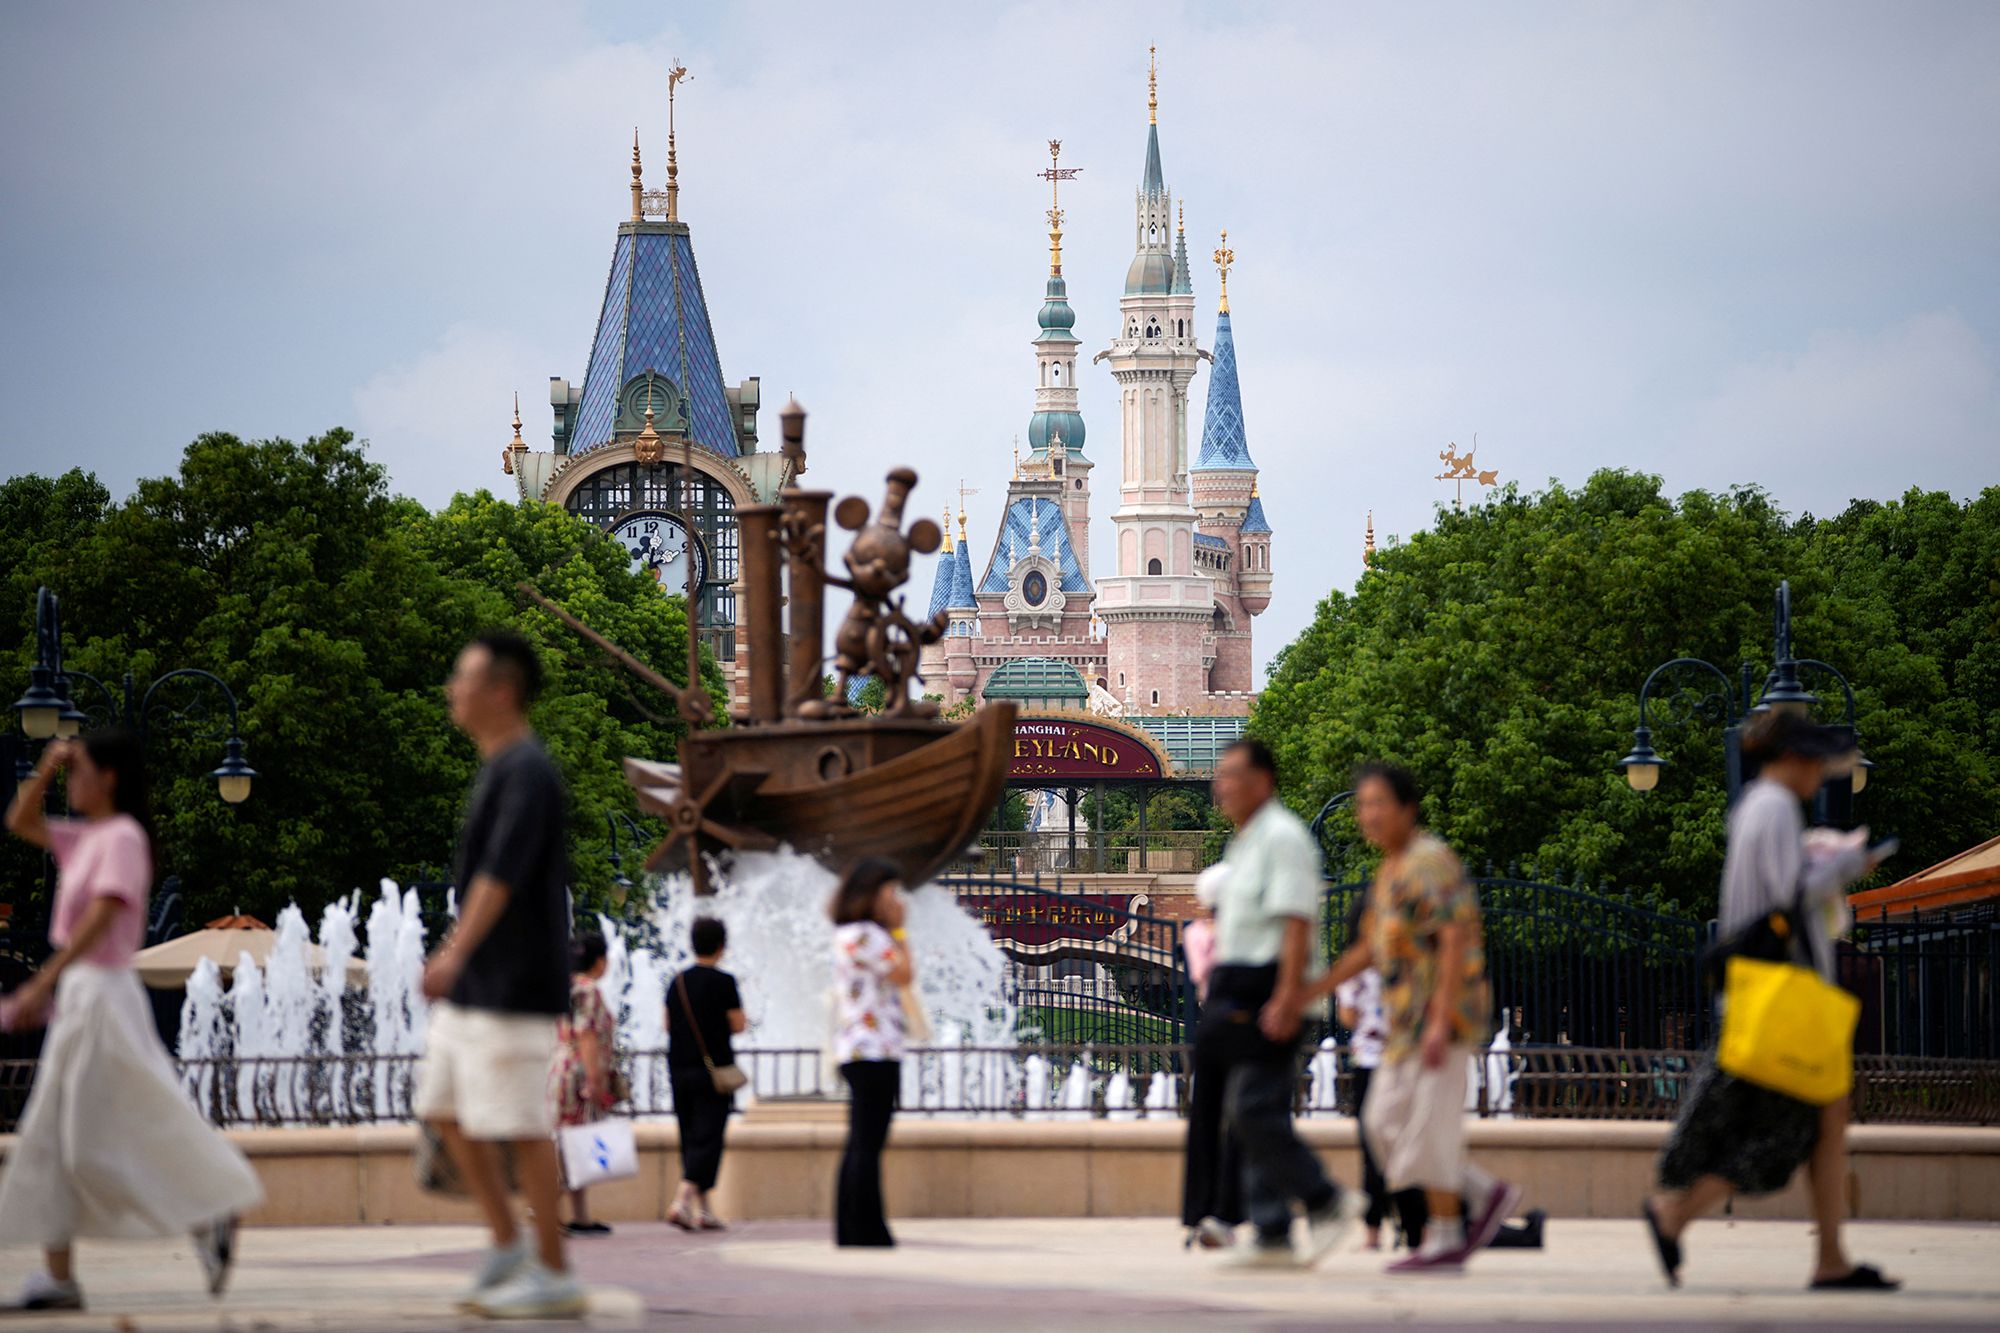 Disney CEO Thinks Its Theme Parks Are Too Expensive: WSJ